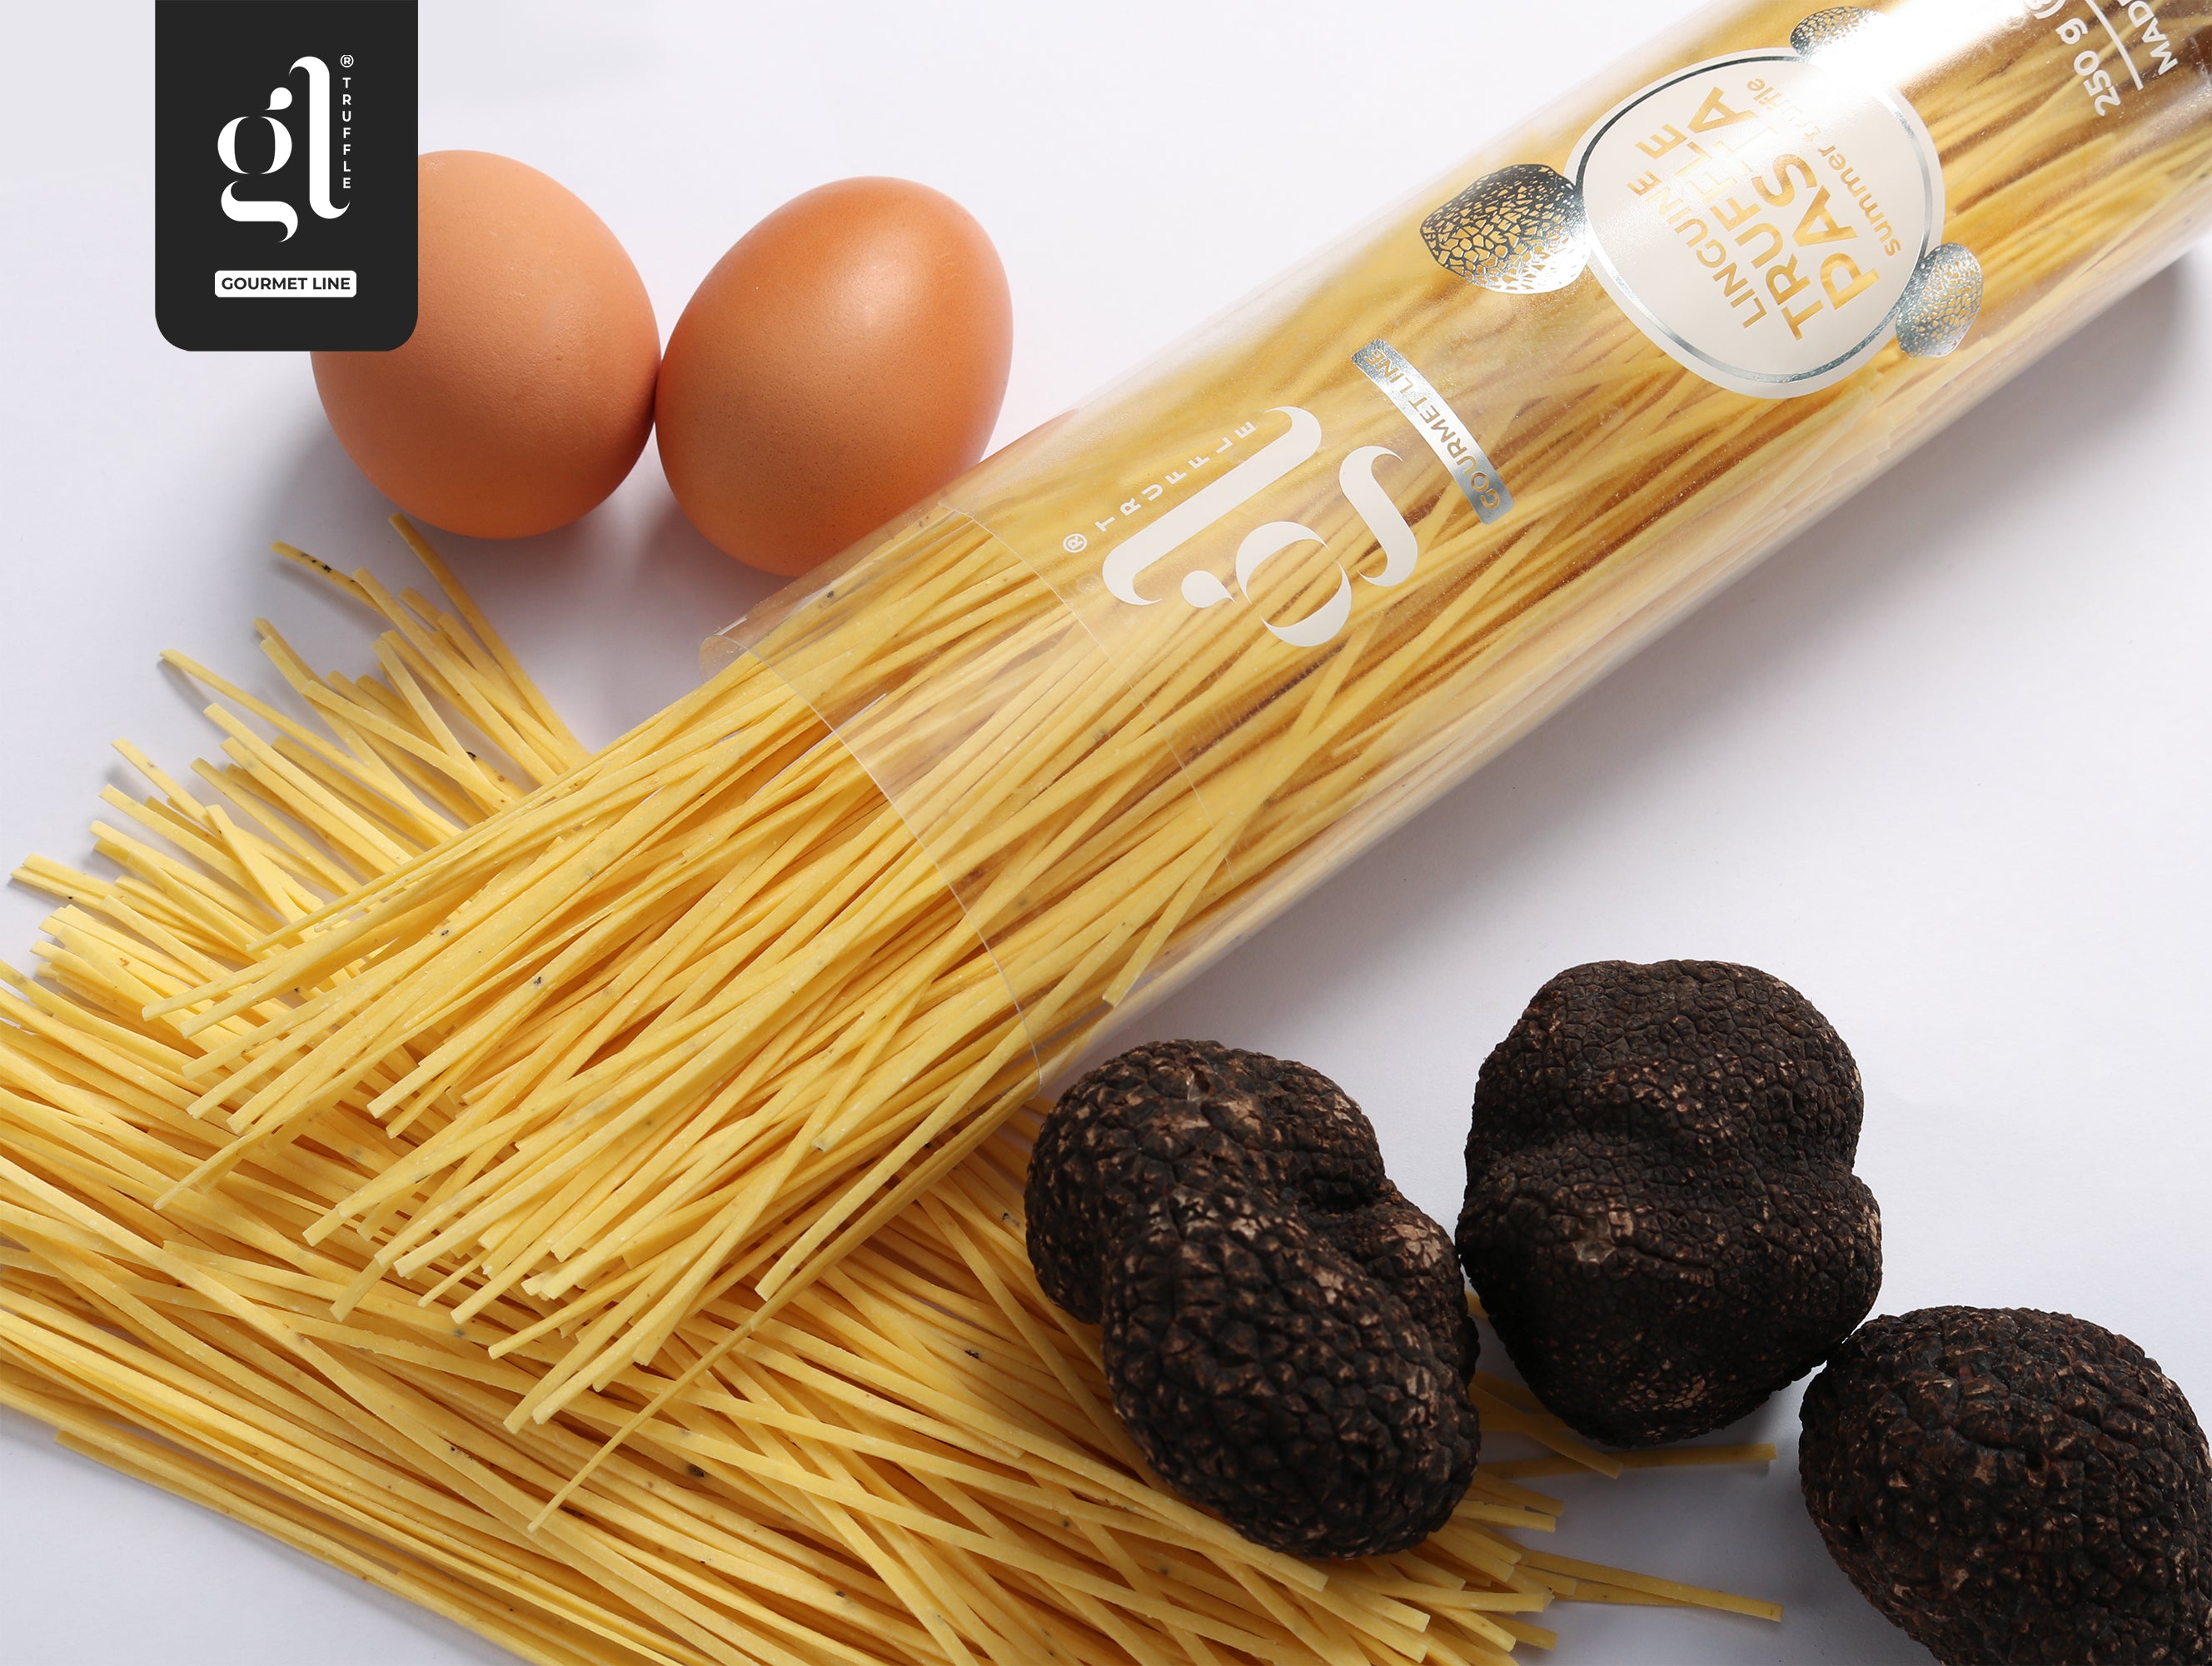 GL Truffle Gourmet Line, Whole Black Summer Truffle, 35 gr (1.2 oz) Preserved, Product of Italy